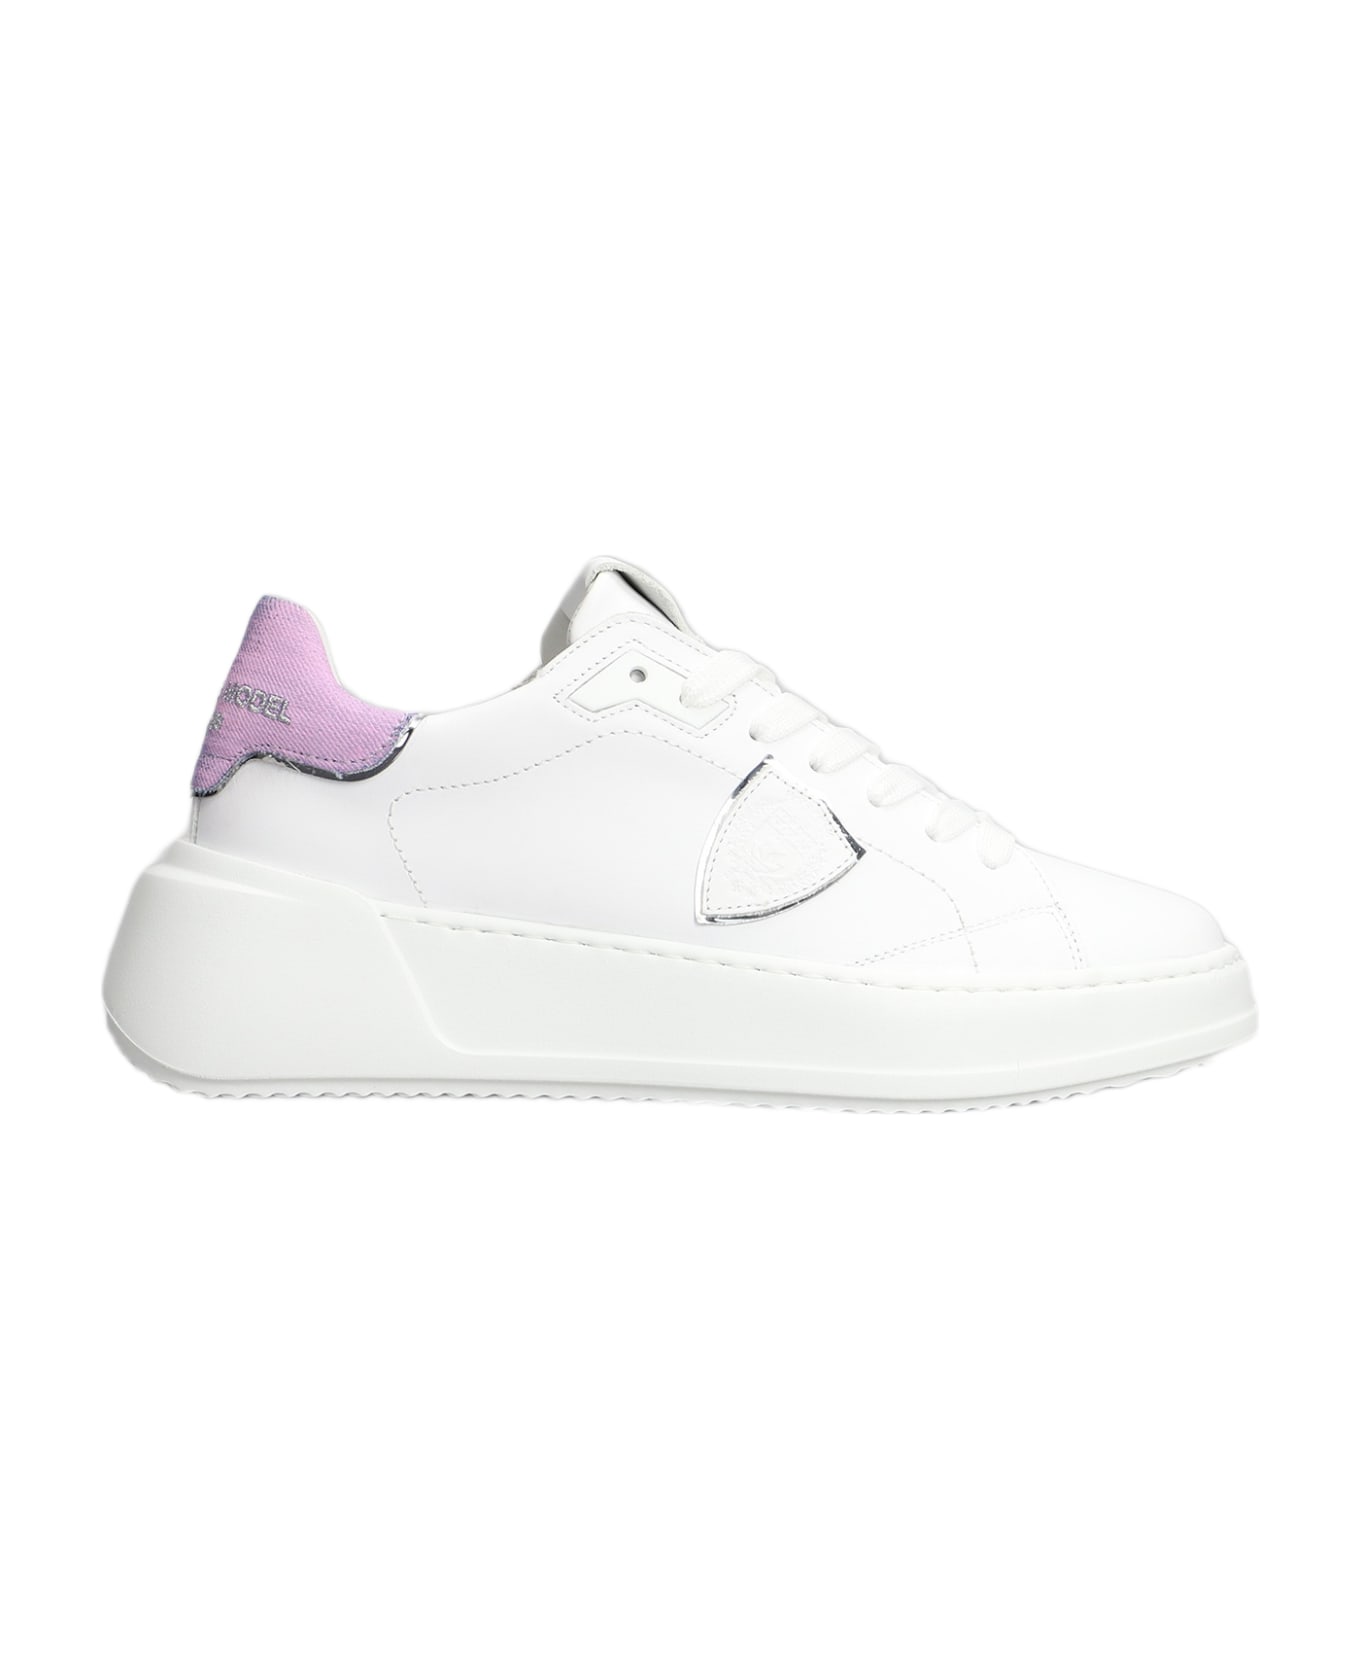 Philippe Model Tres Temple Low Sneakers In White Leather - white